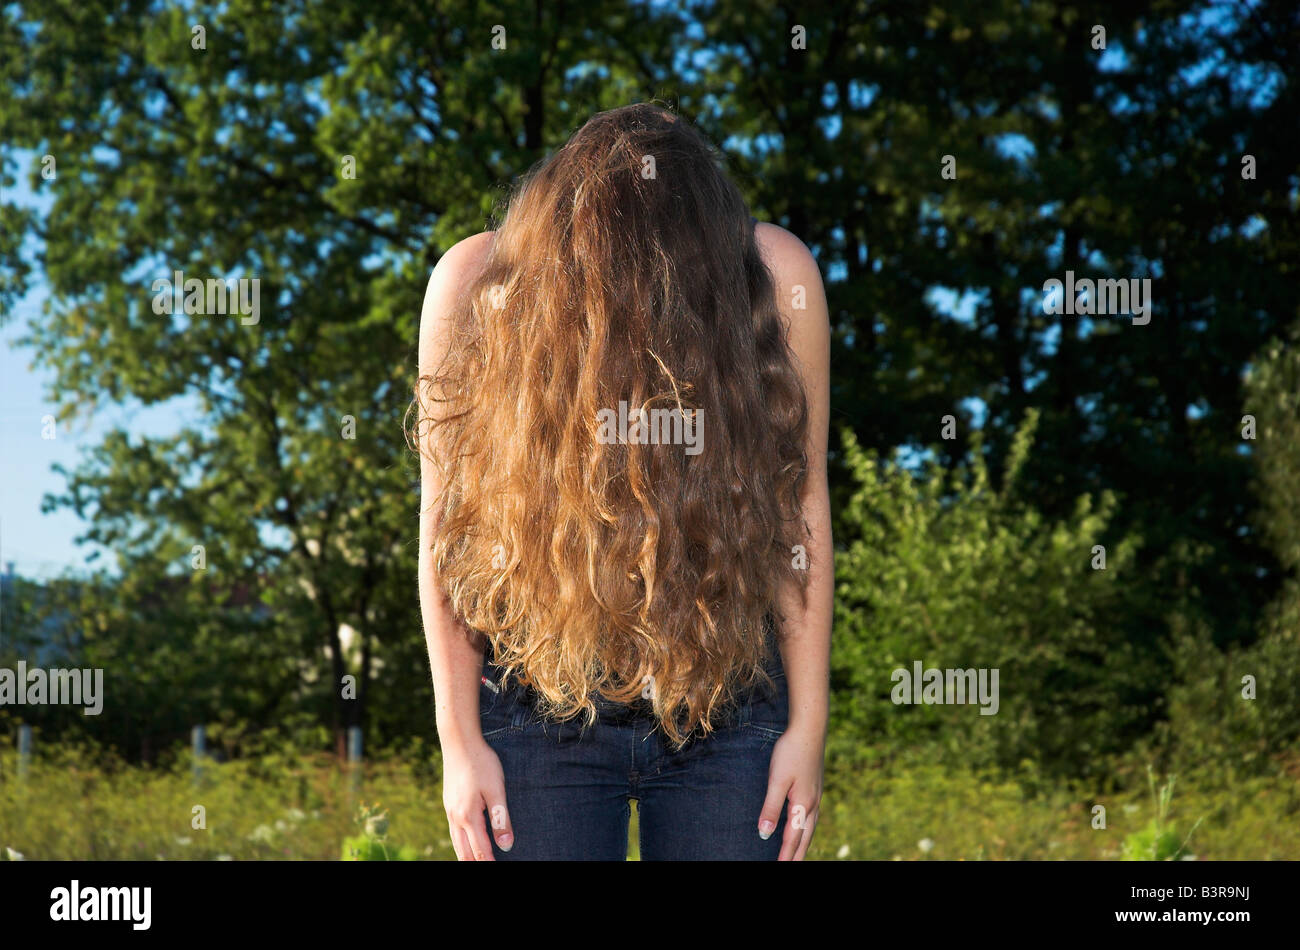 Teenage girl 16 18 with long curly hair bending over Stock Photo